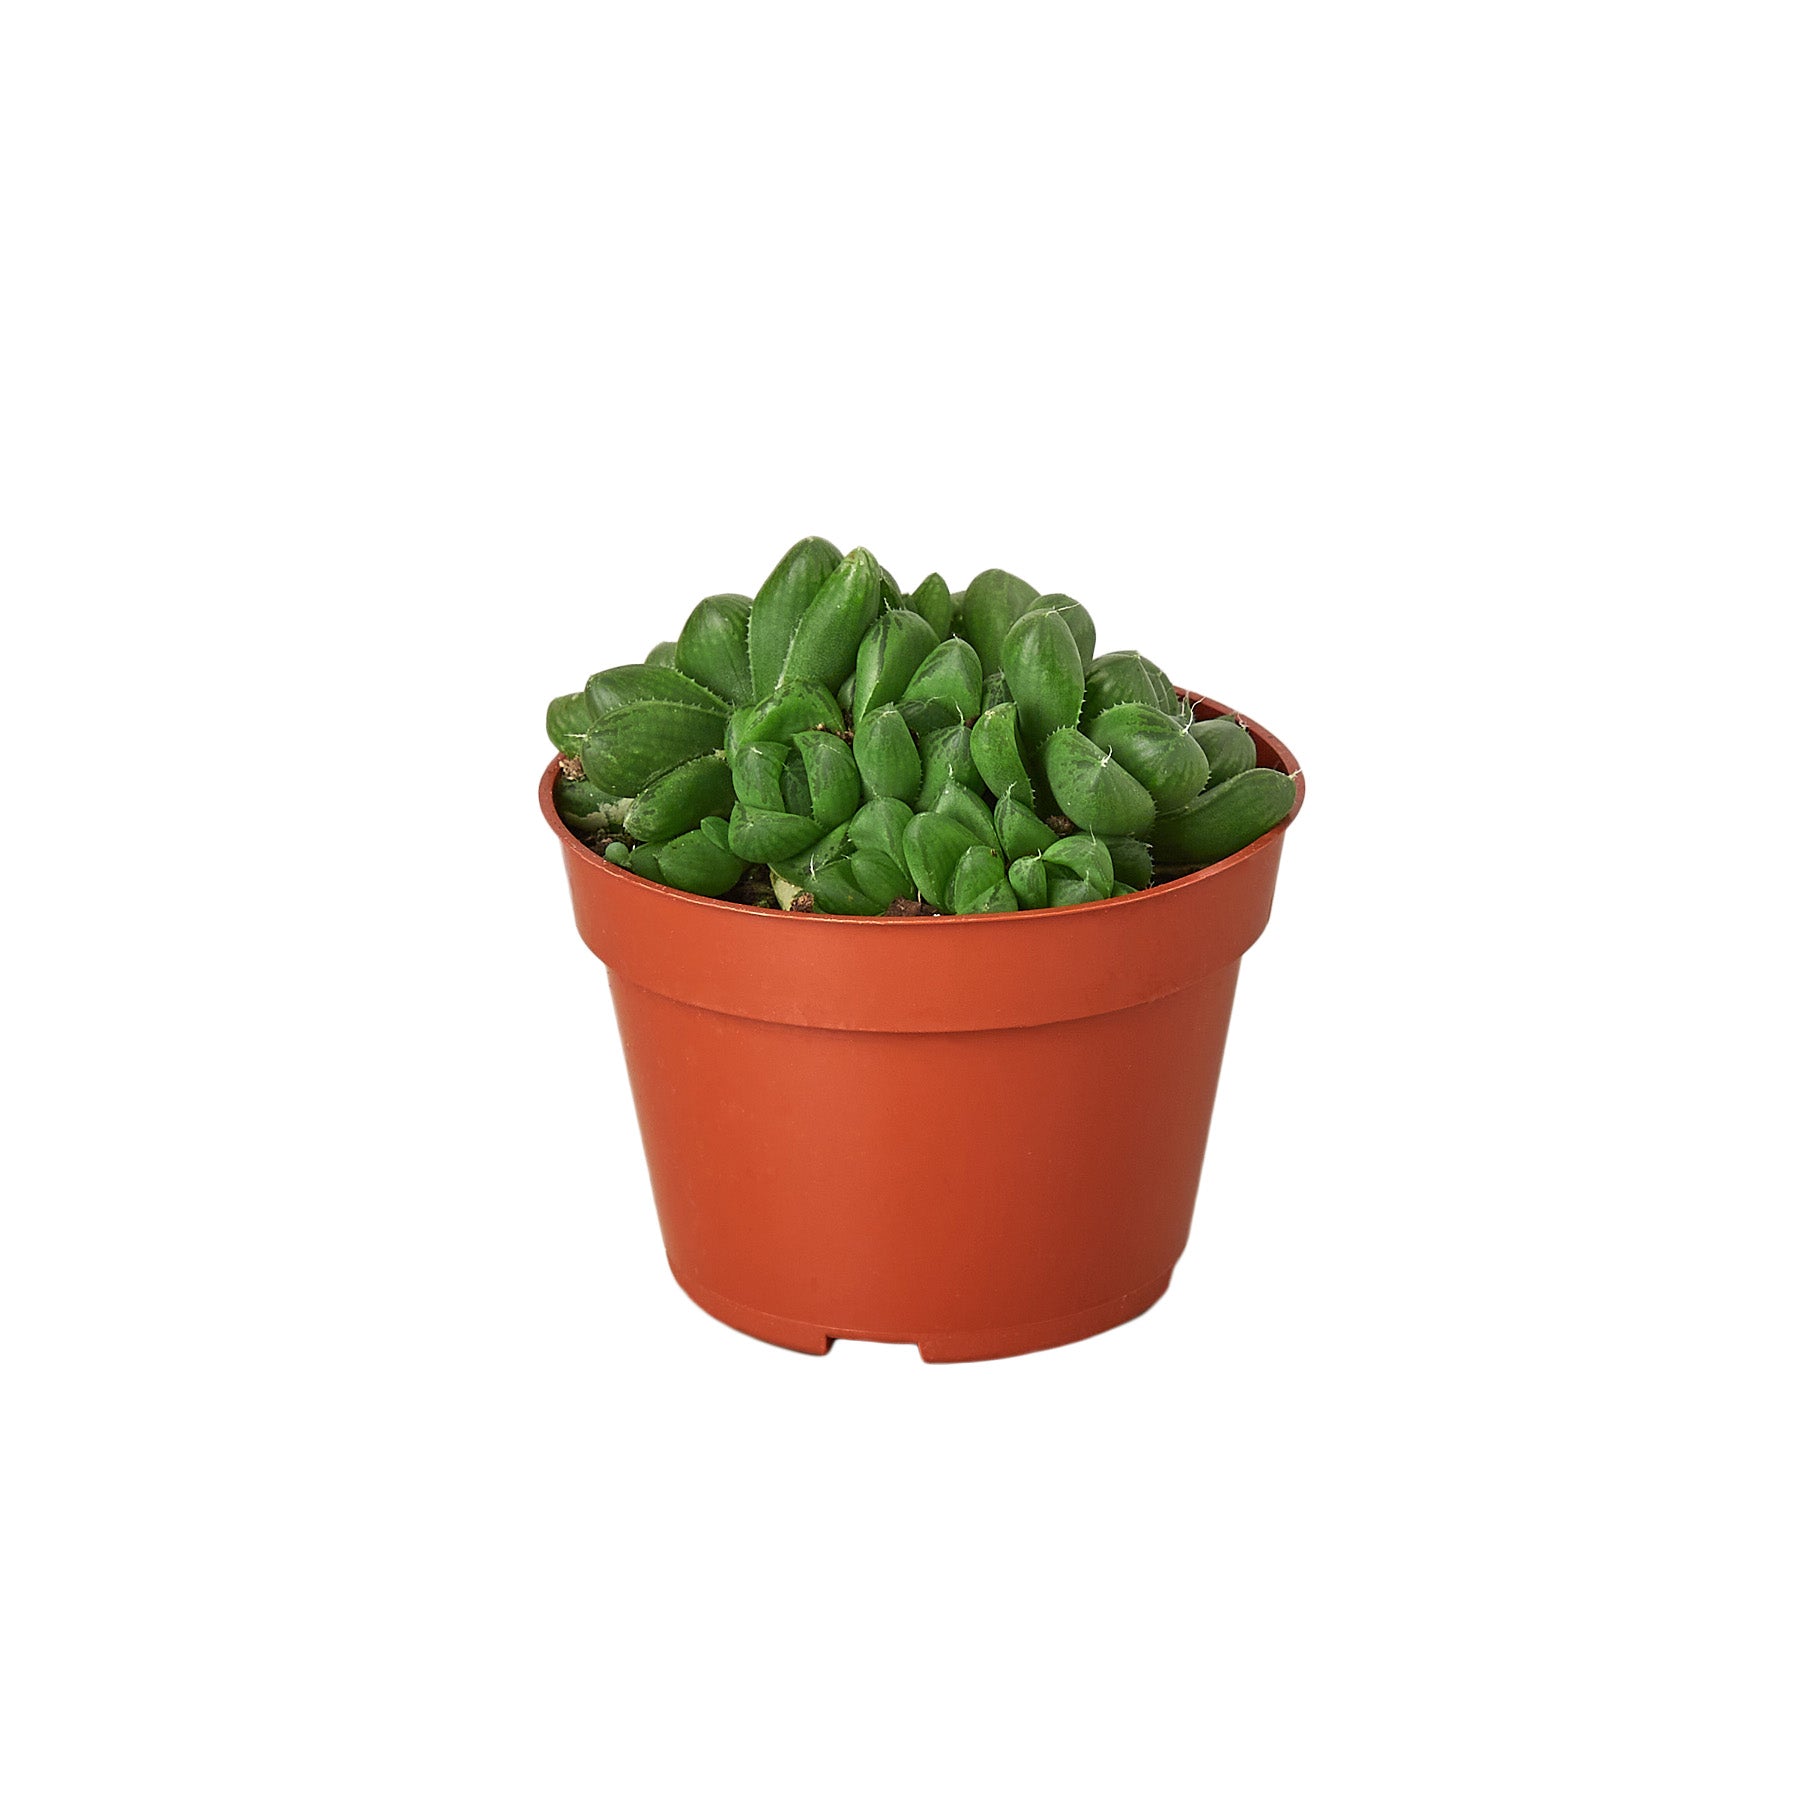 A vibrant potted plant with green leaves on a white background.